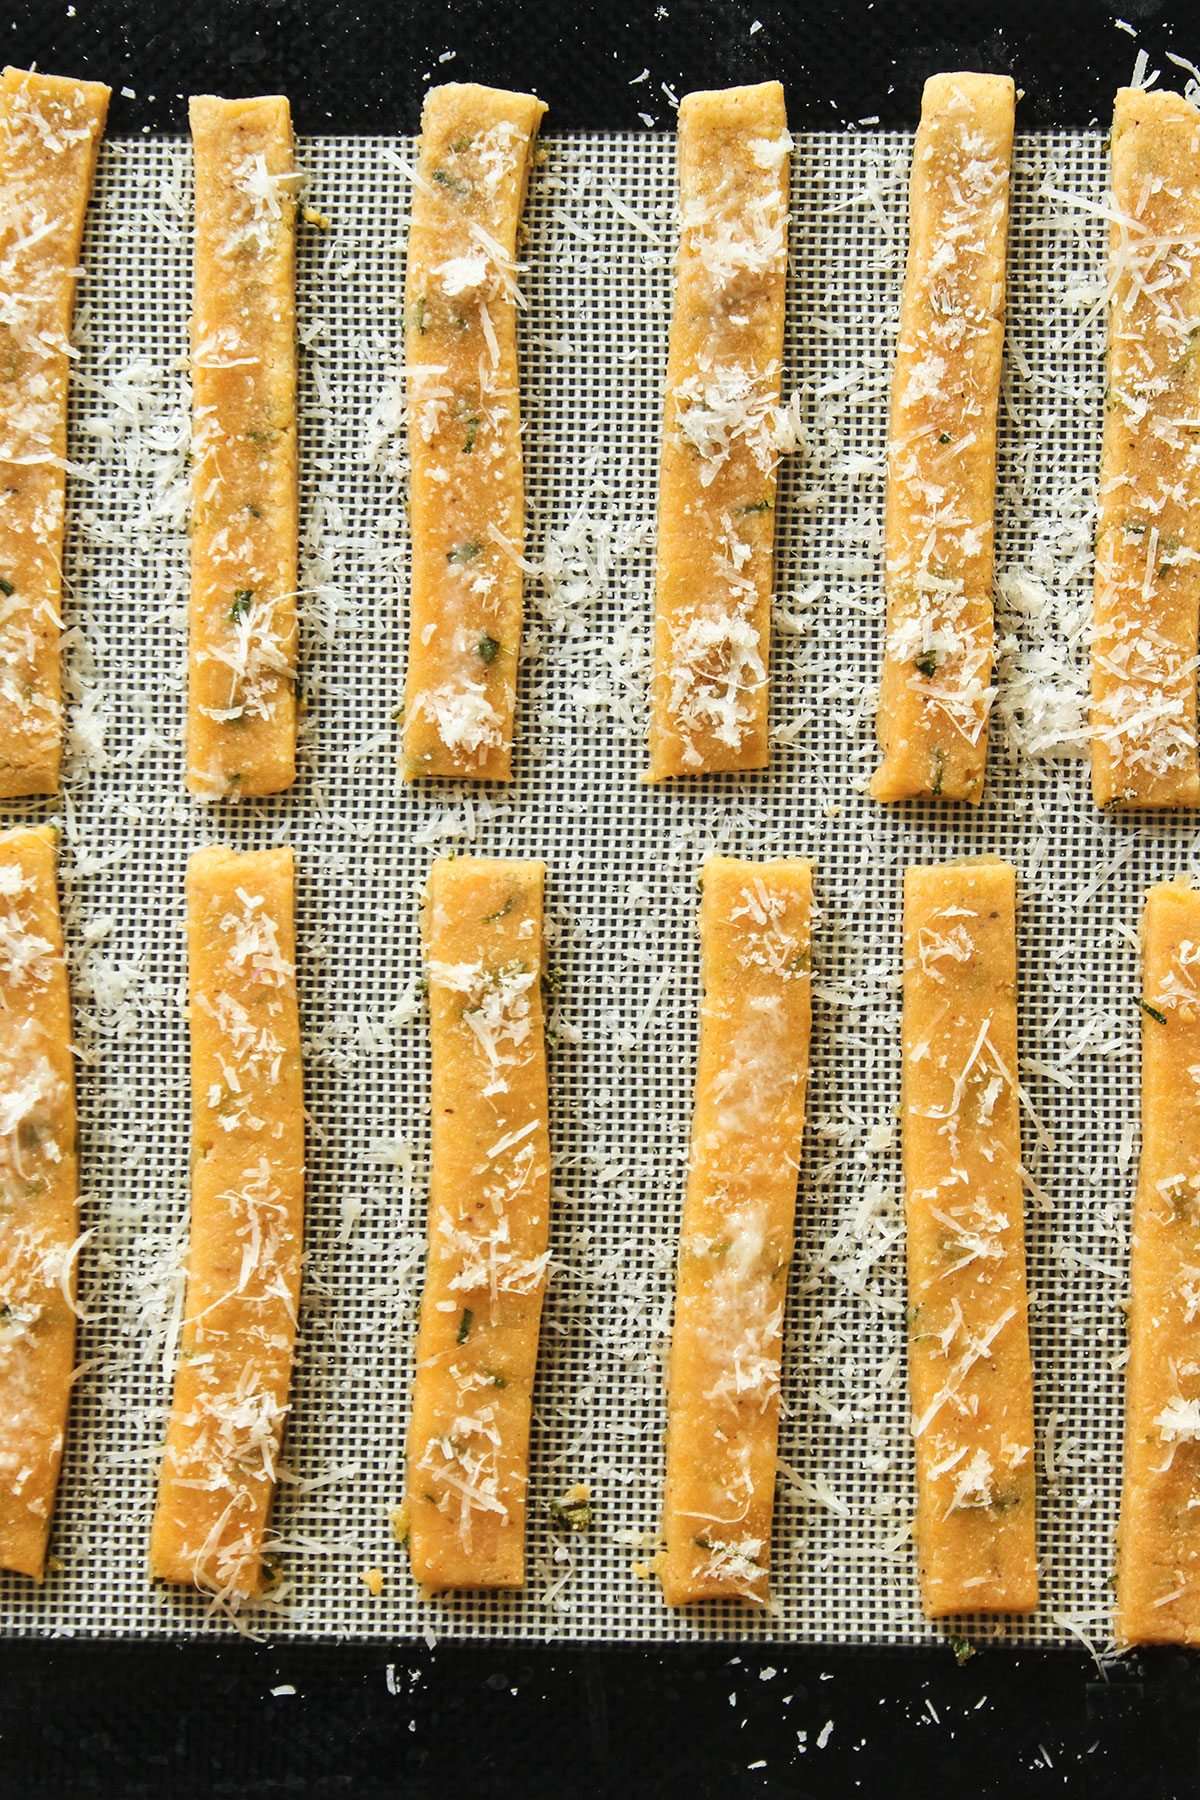 The dough strips brushed with egg white and sprinkled with Parmesan on a gauze background.